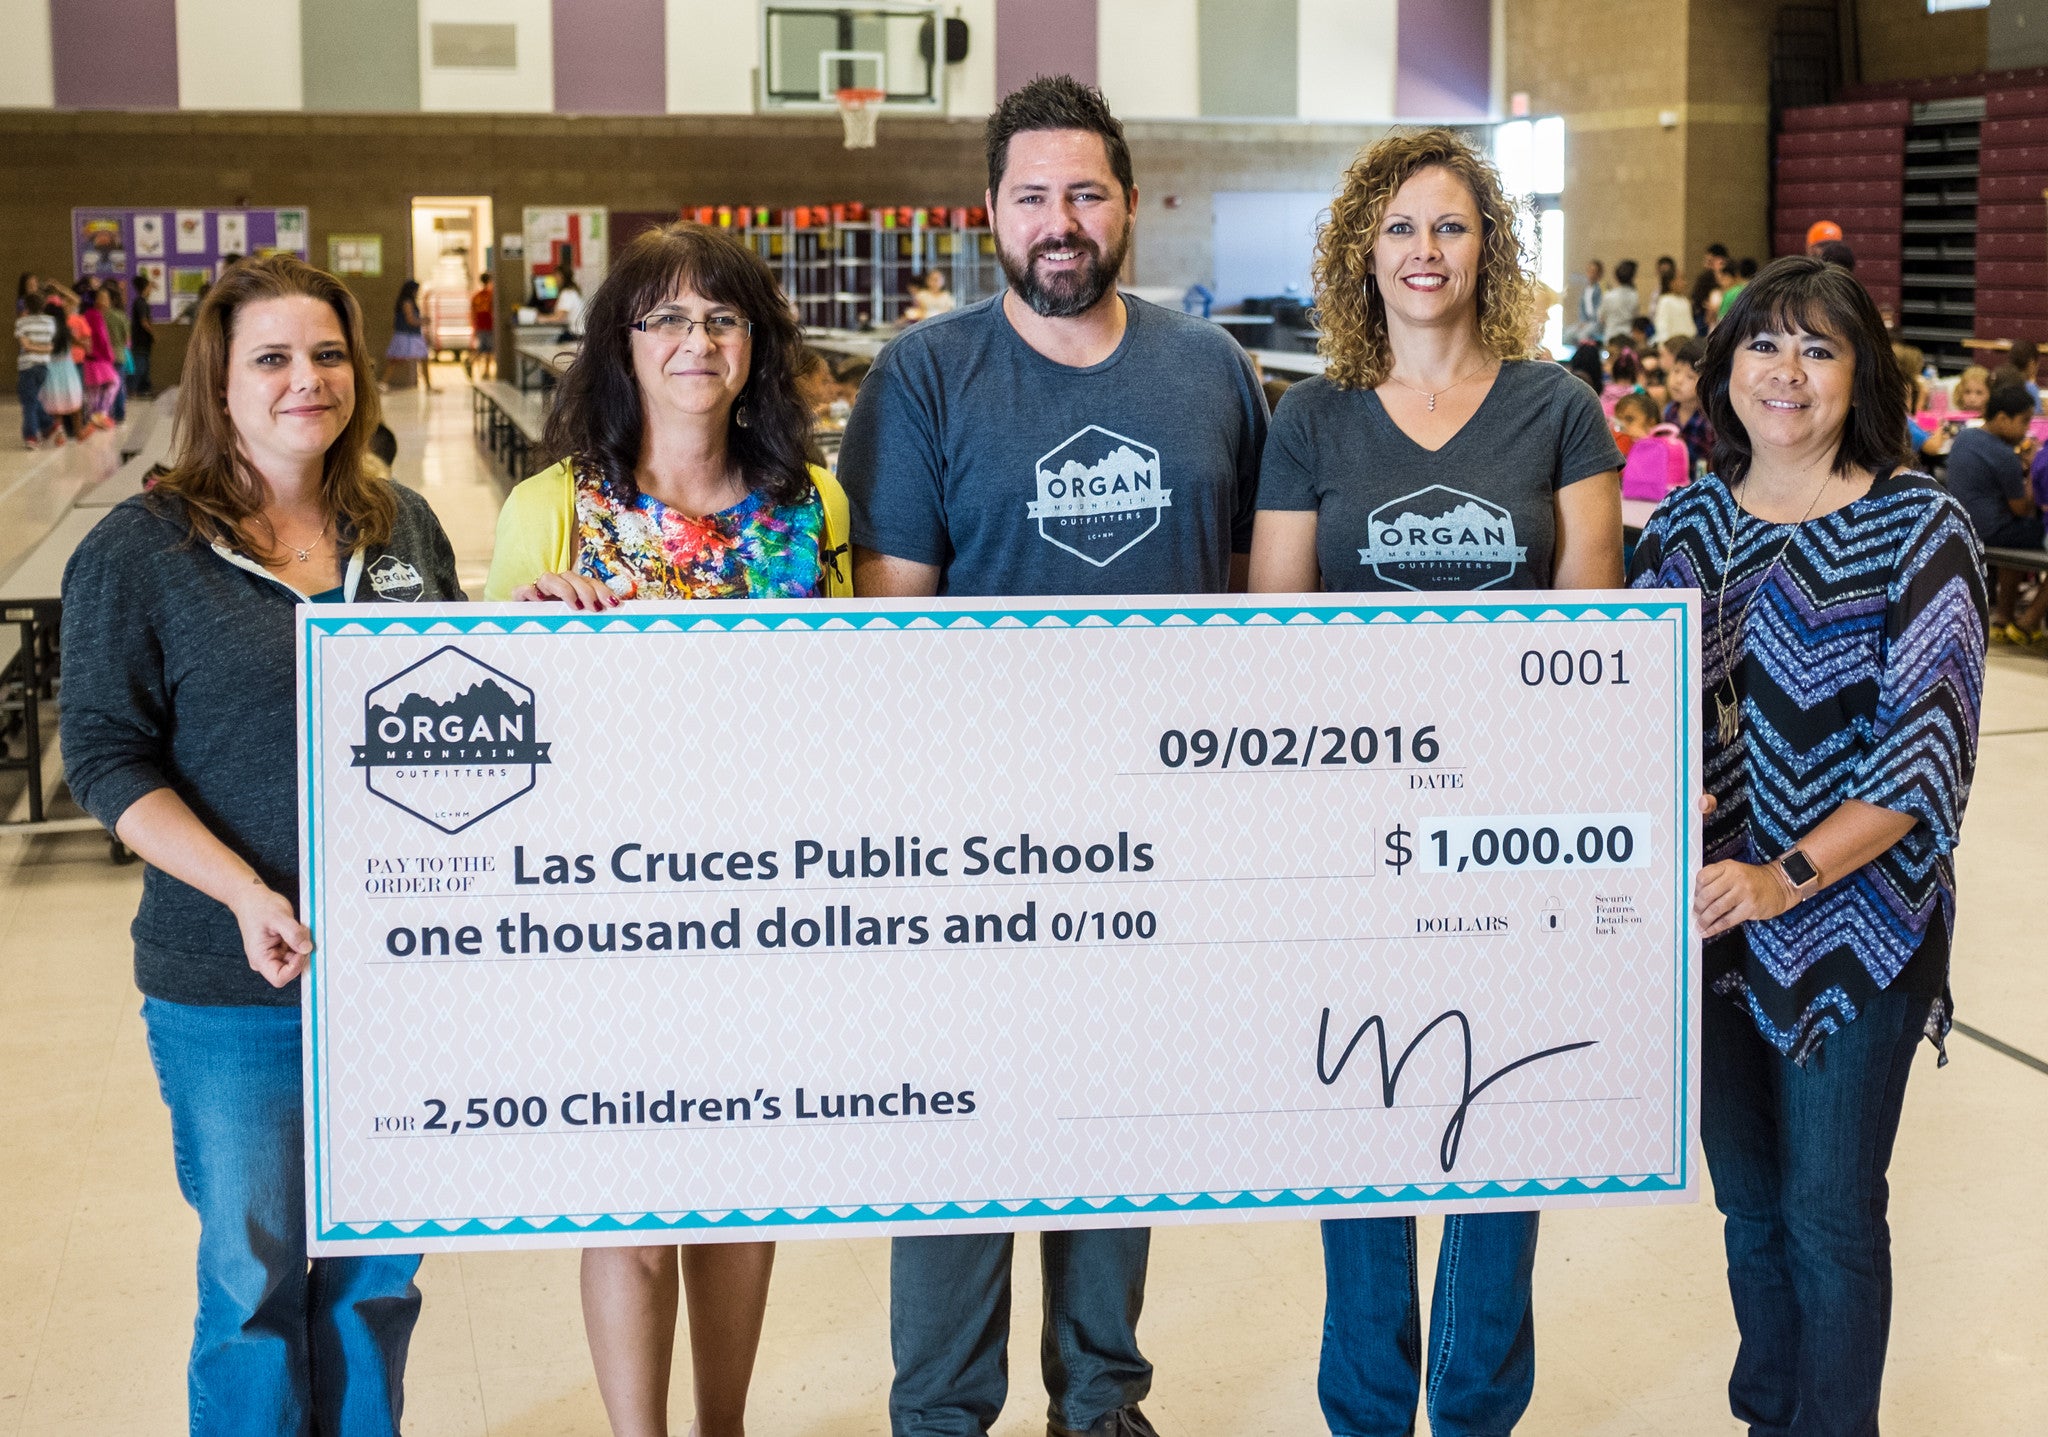 Organ Mountain Outfitters Presents A $1,000 Check to the Las Cruces Public Schools